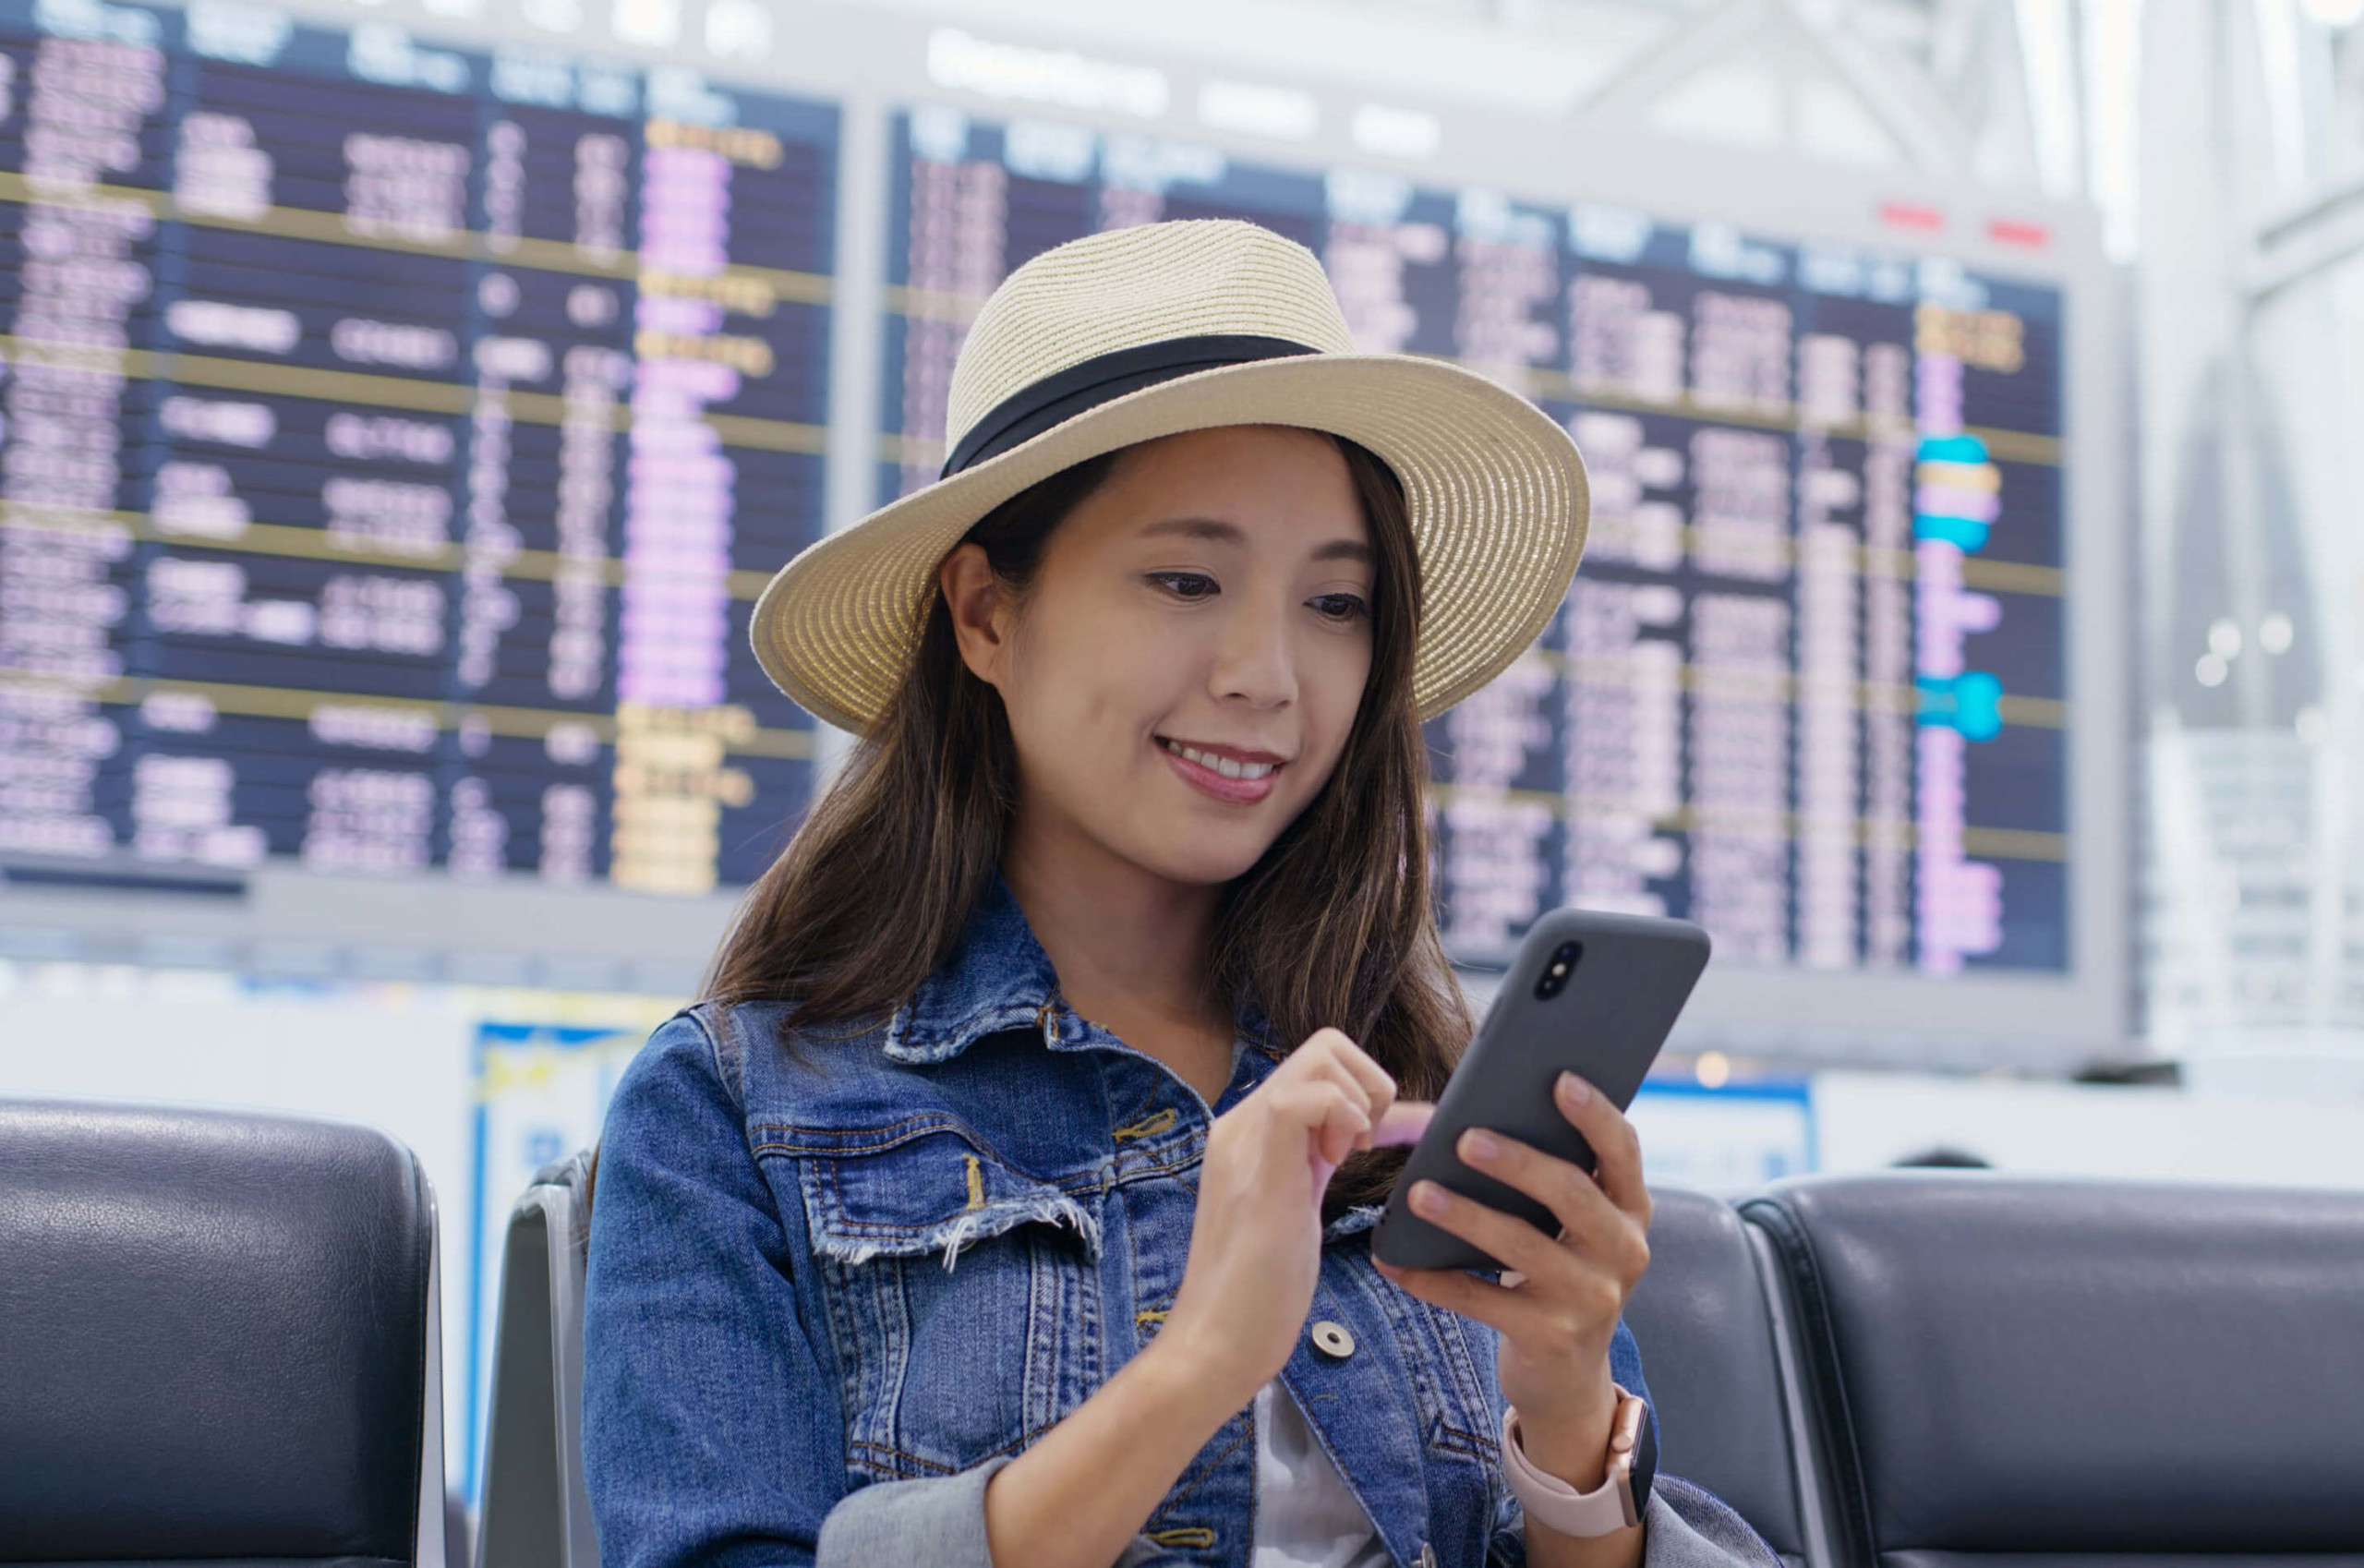 Woman in airport using VeriFLY on her smartphone